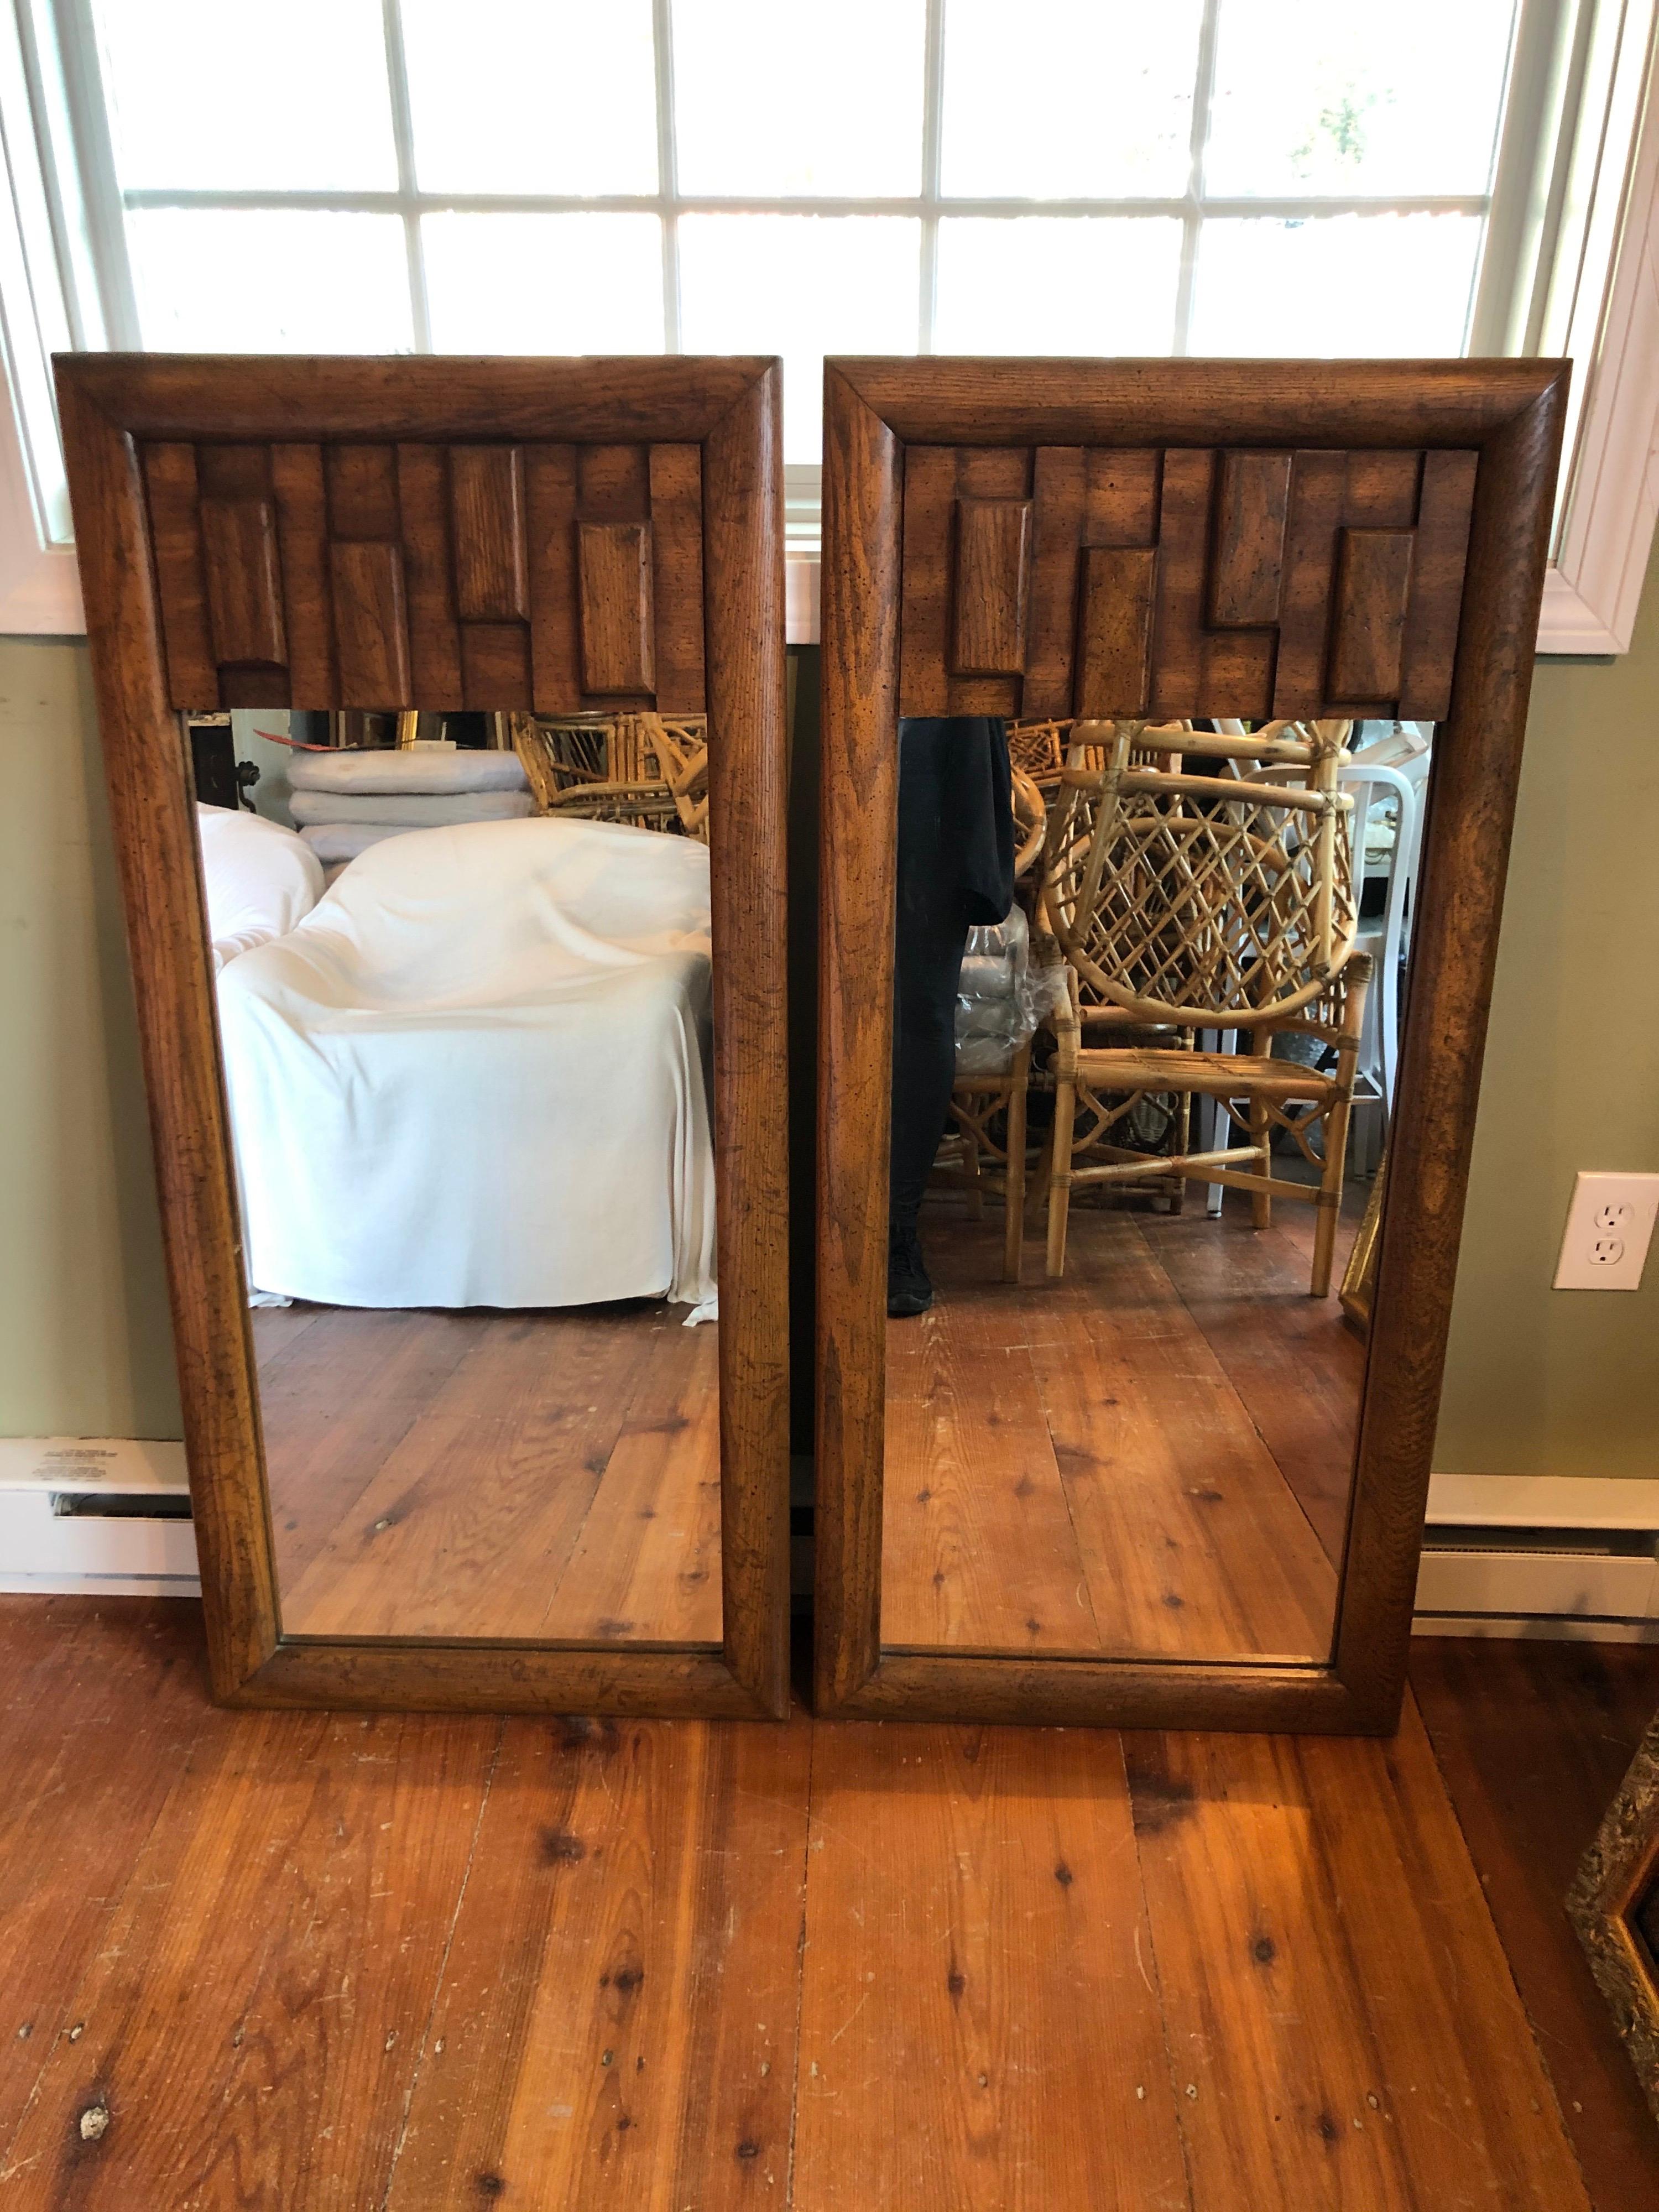 Pair of Brutalist Mid-Century Modern mirrors. Perfect for his and her vanity. 3D quality with rich textures.

Please inquire about local tri-state dealer delivery which is more economical than 1stdibs white glove shipping.